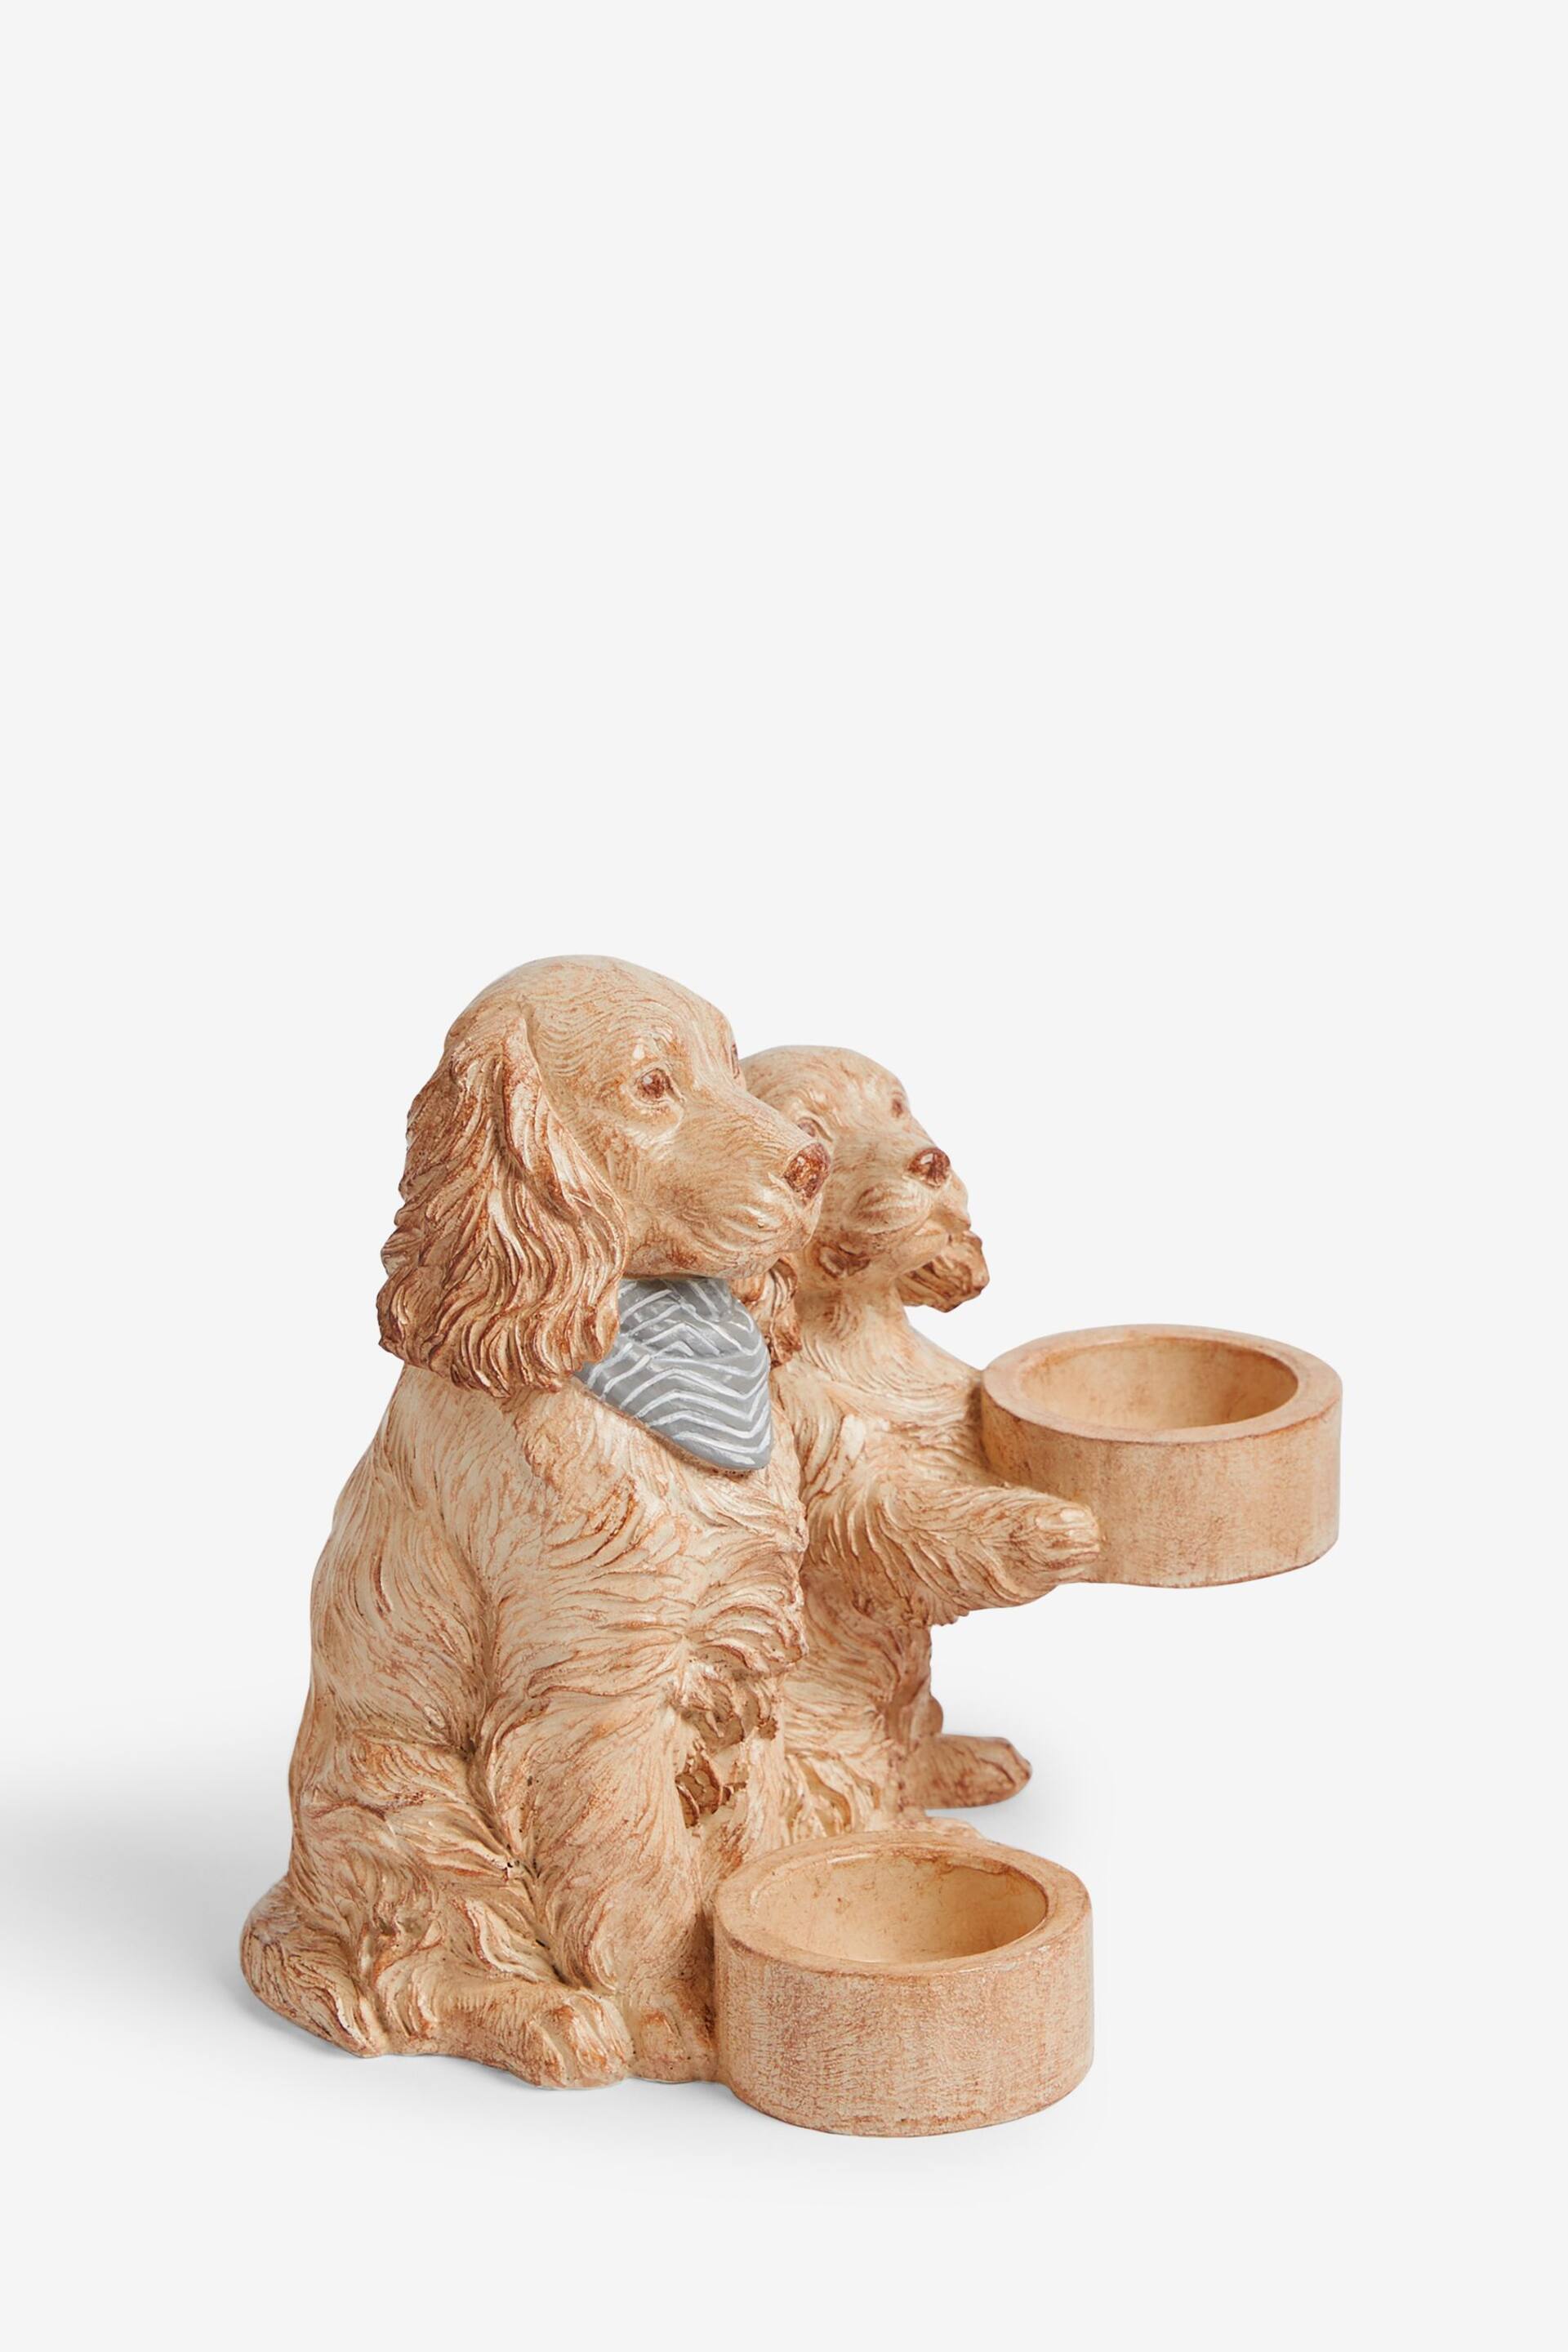 Set of 2 Natural Cooper the Spaniel and Friends Tealight Candle Holder - Image 4 of 5